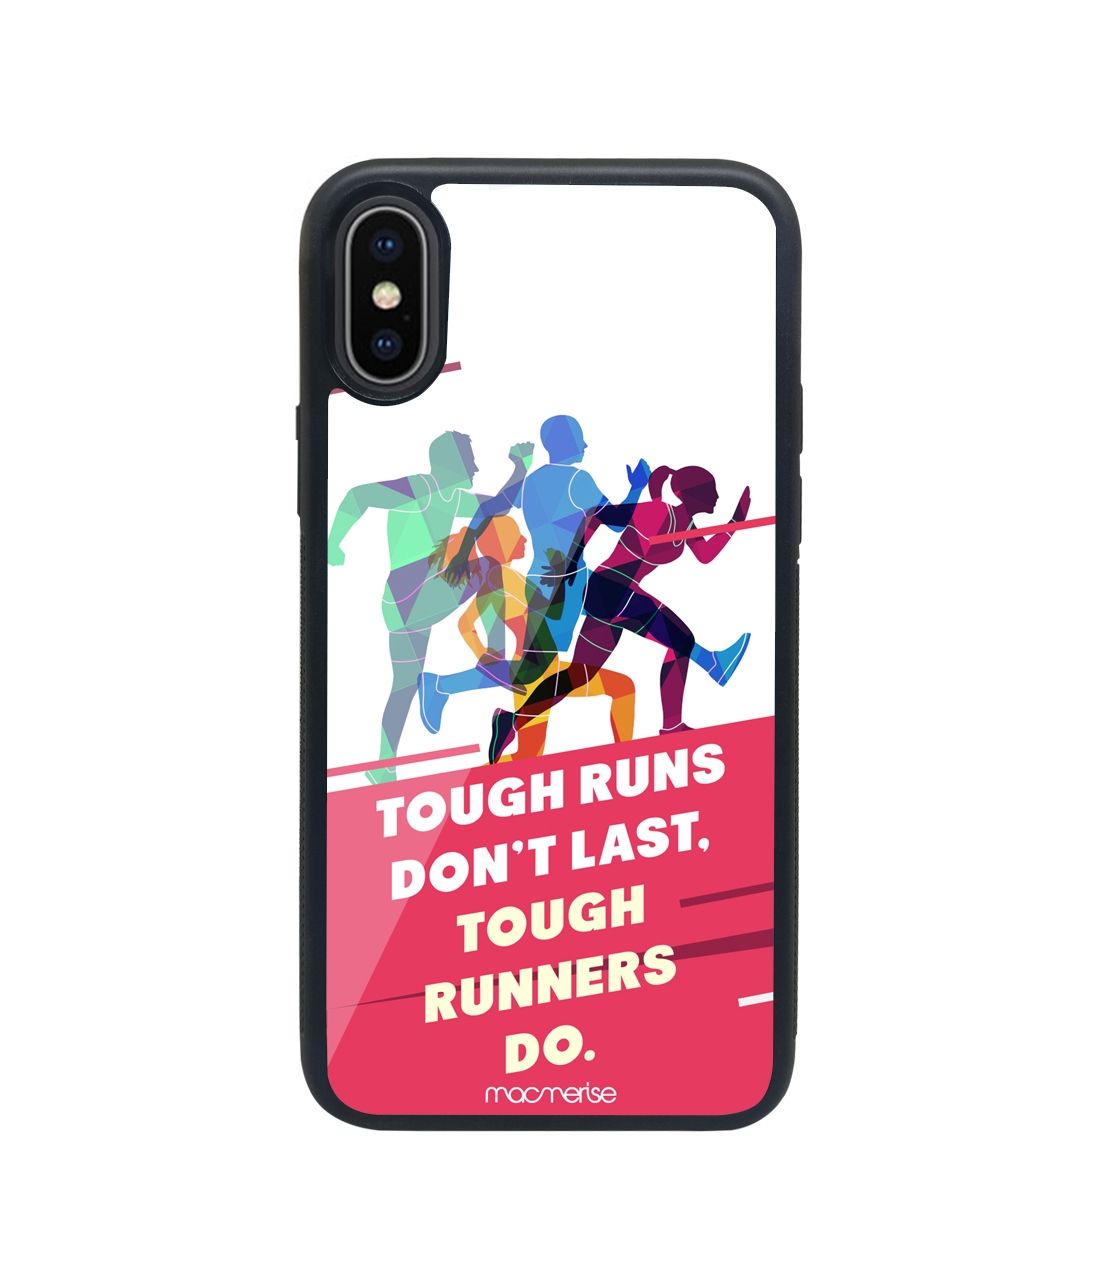 Tough Runners - Glass Phone Case for iPhone XS